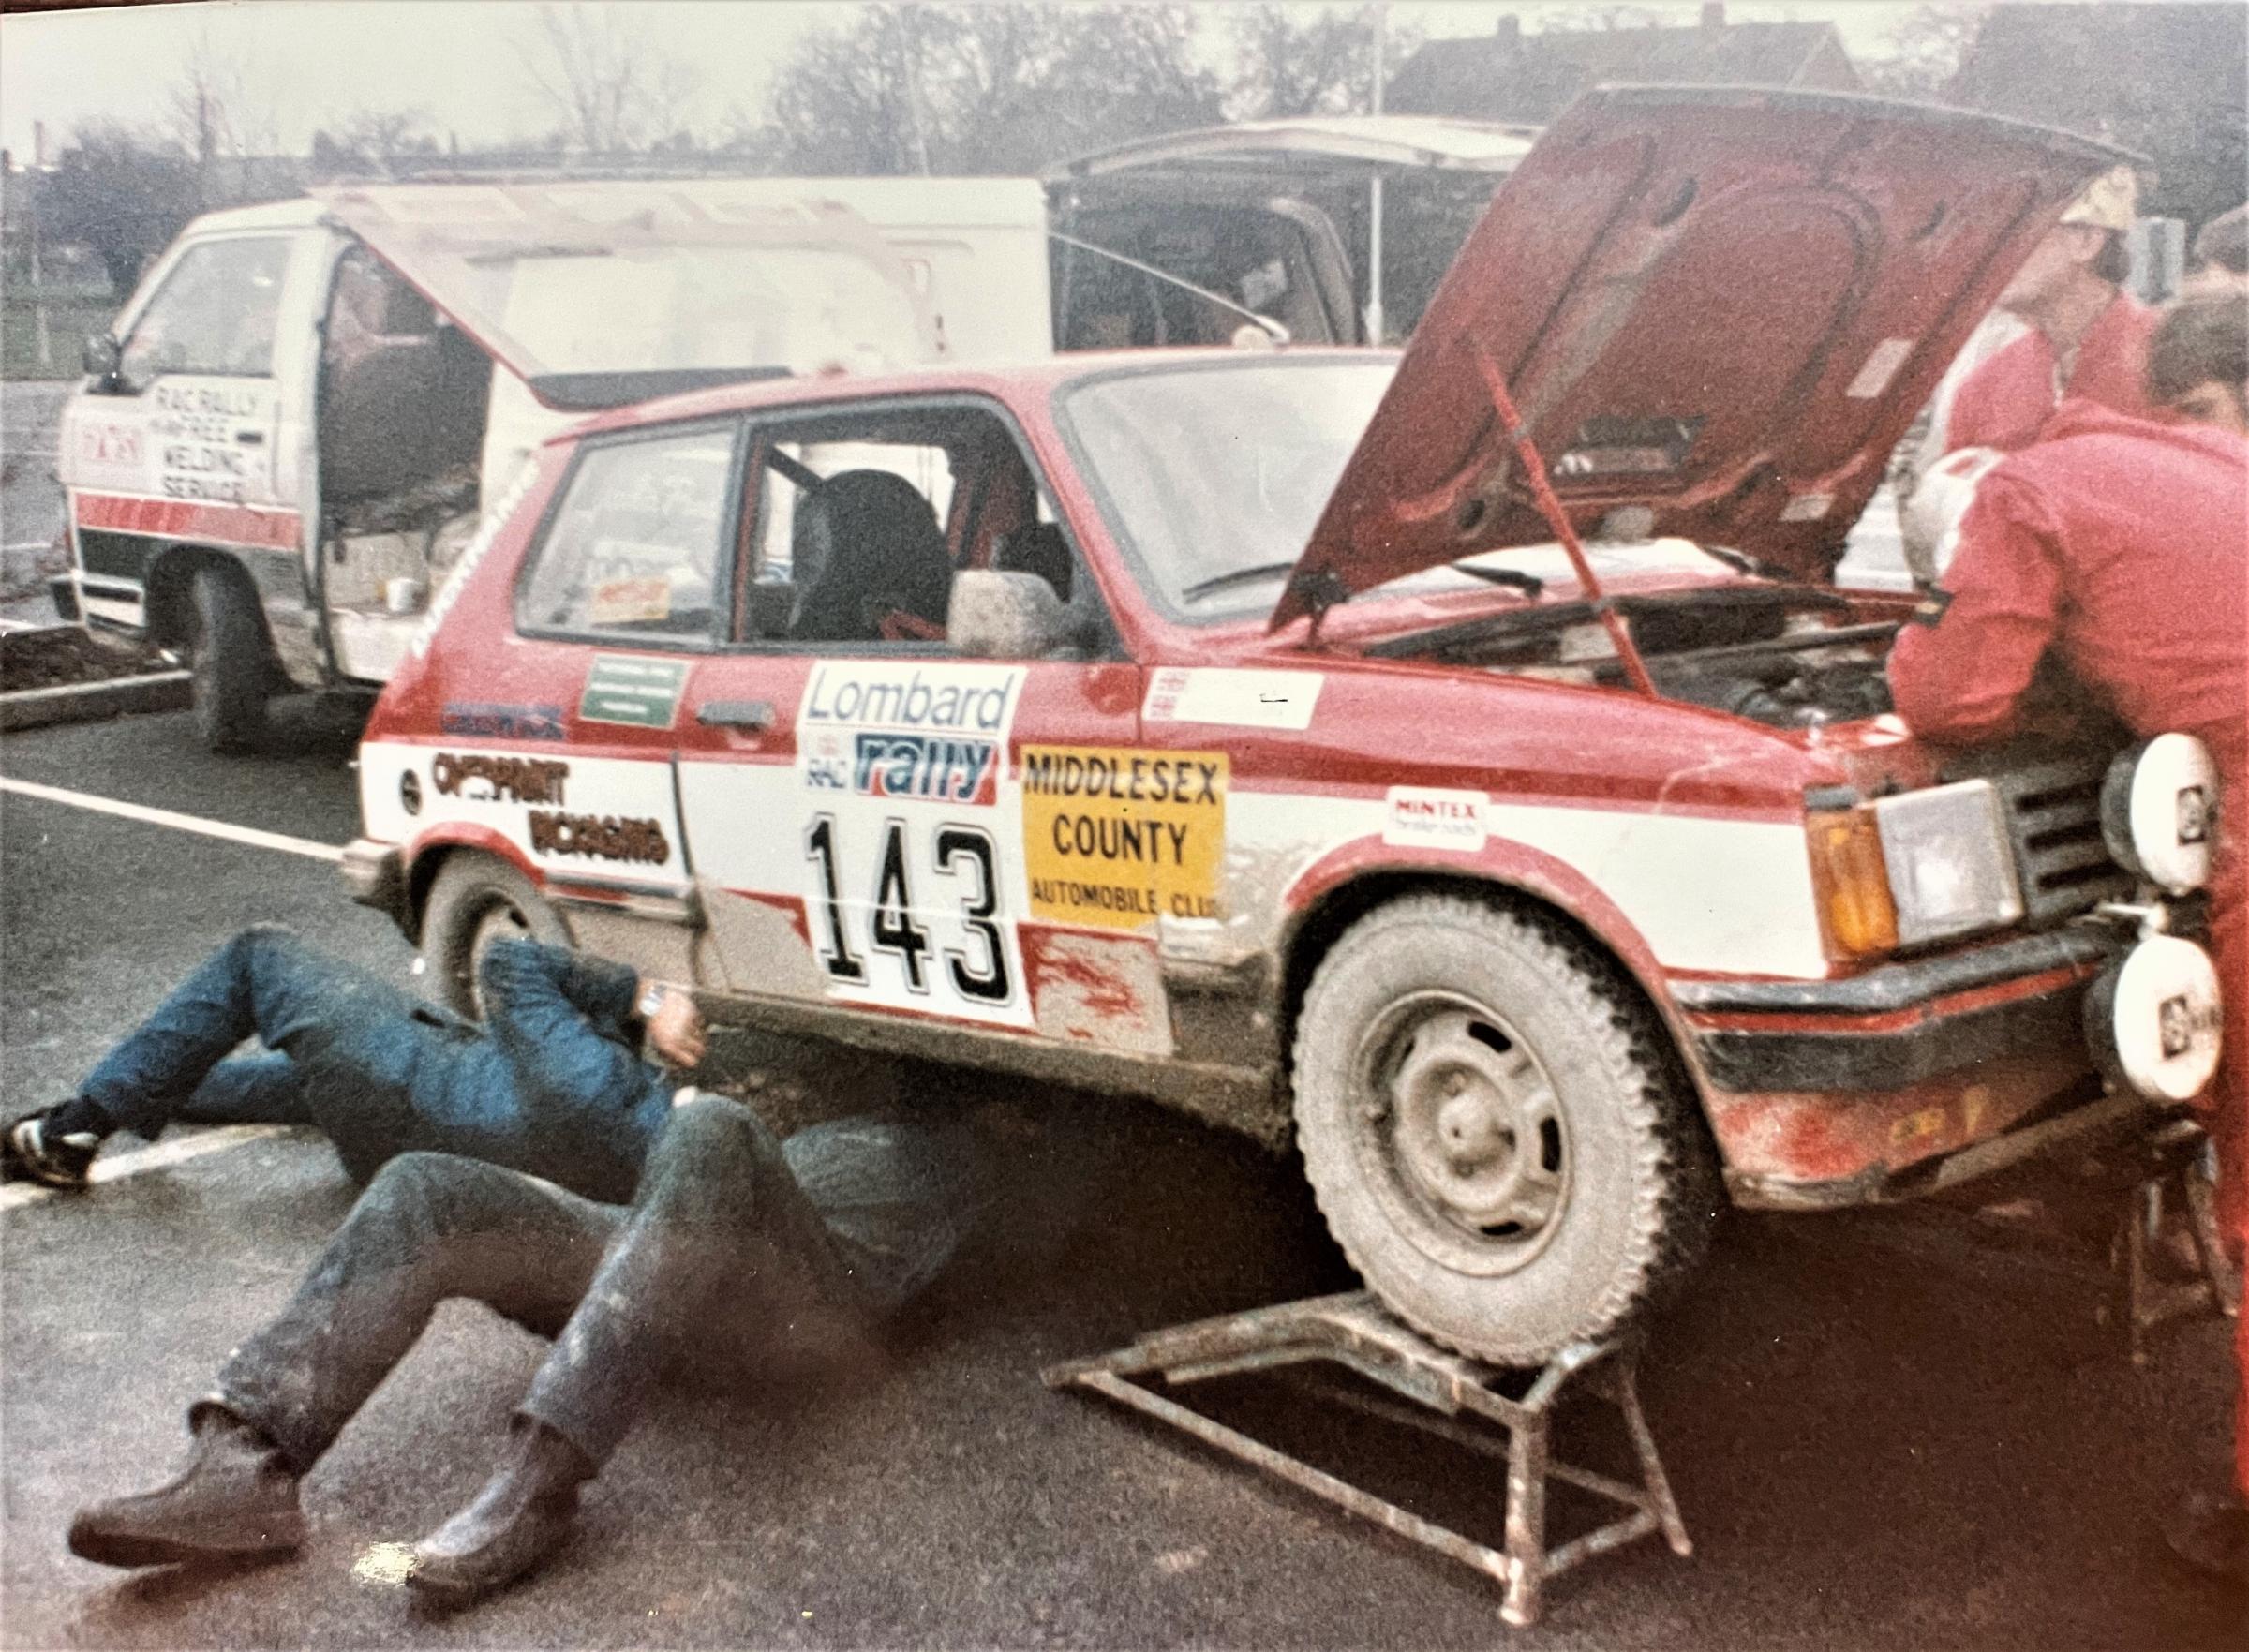 A crew during service on New Street in the RAC Rally, November 1984. Photo courtesy of Howard Smith